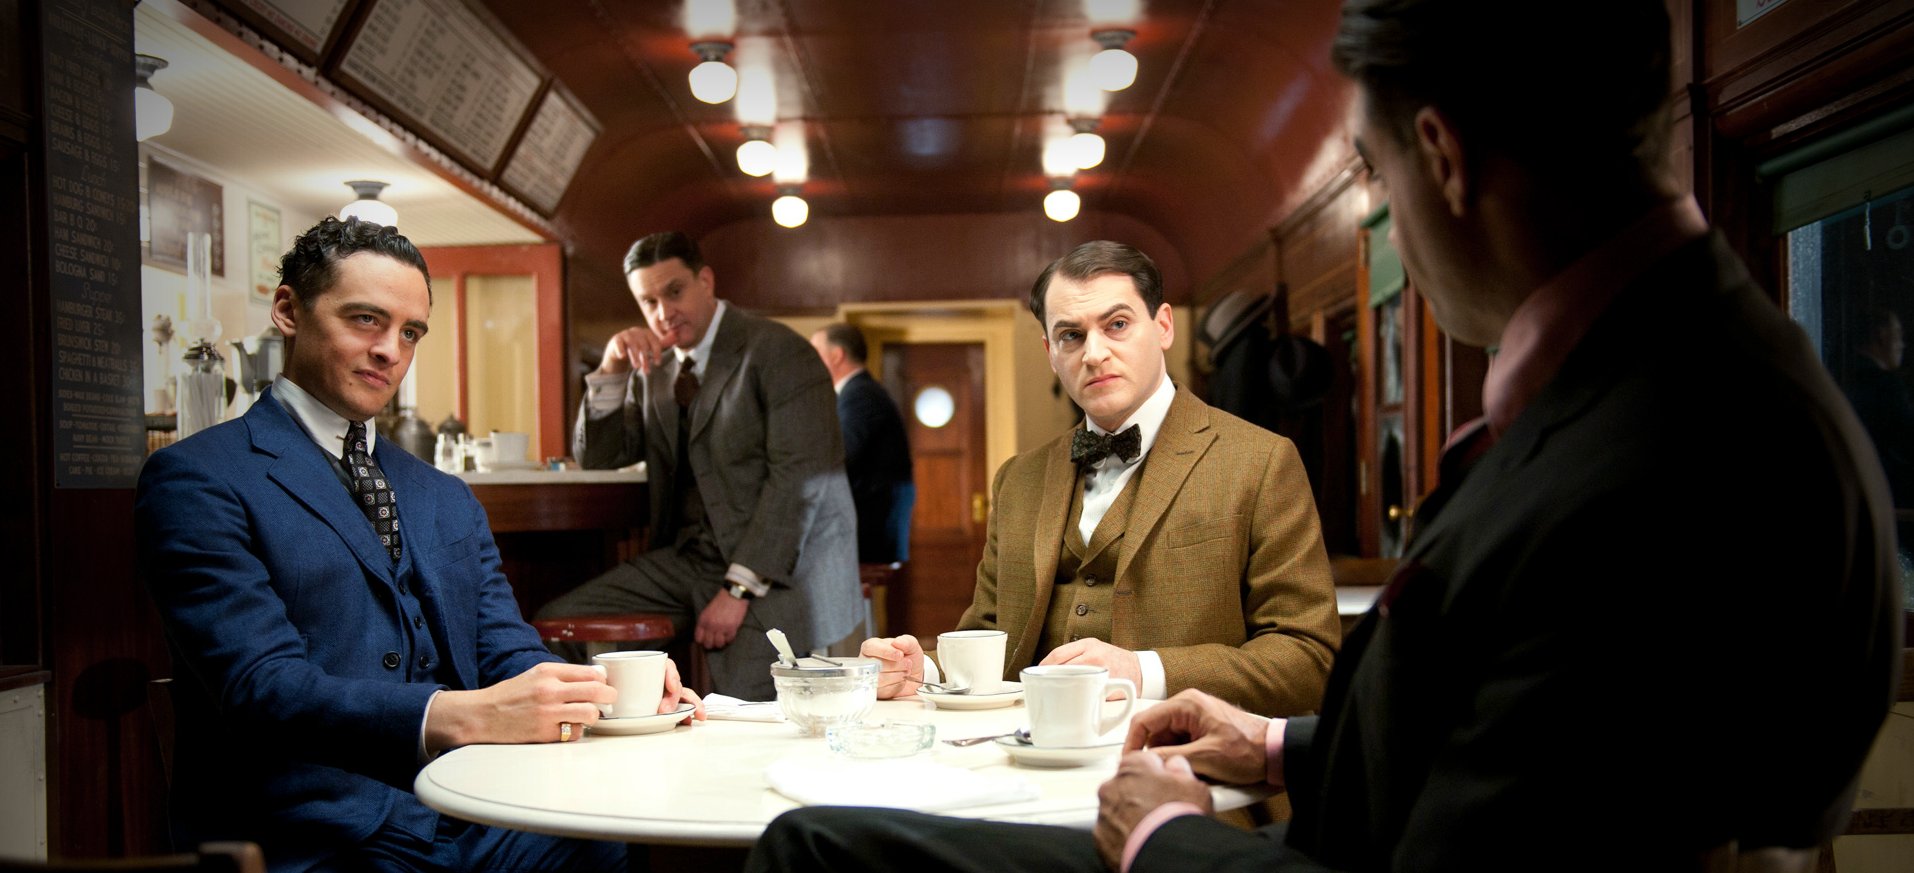 Vincent Piazza, Micheal Stuhlbarg, Bobby Cannavale, and Chris Caldovino HBO Boardwalk Empire